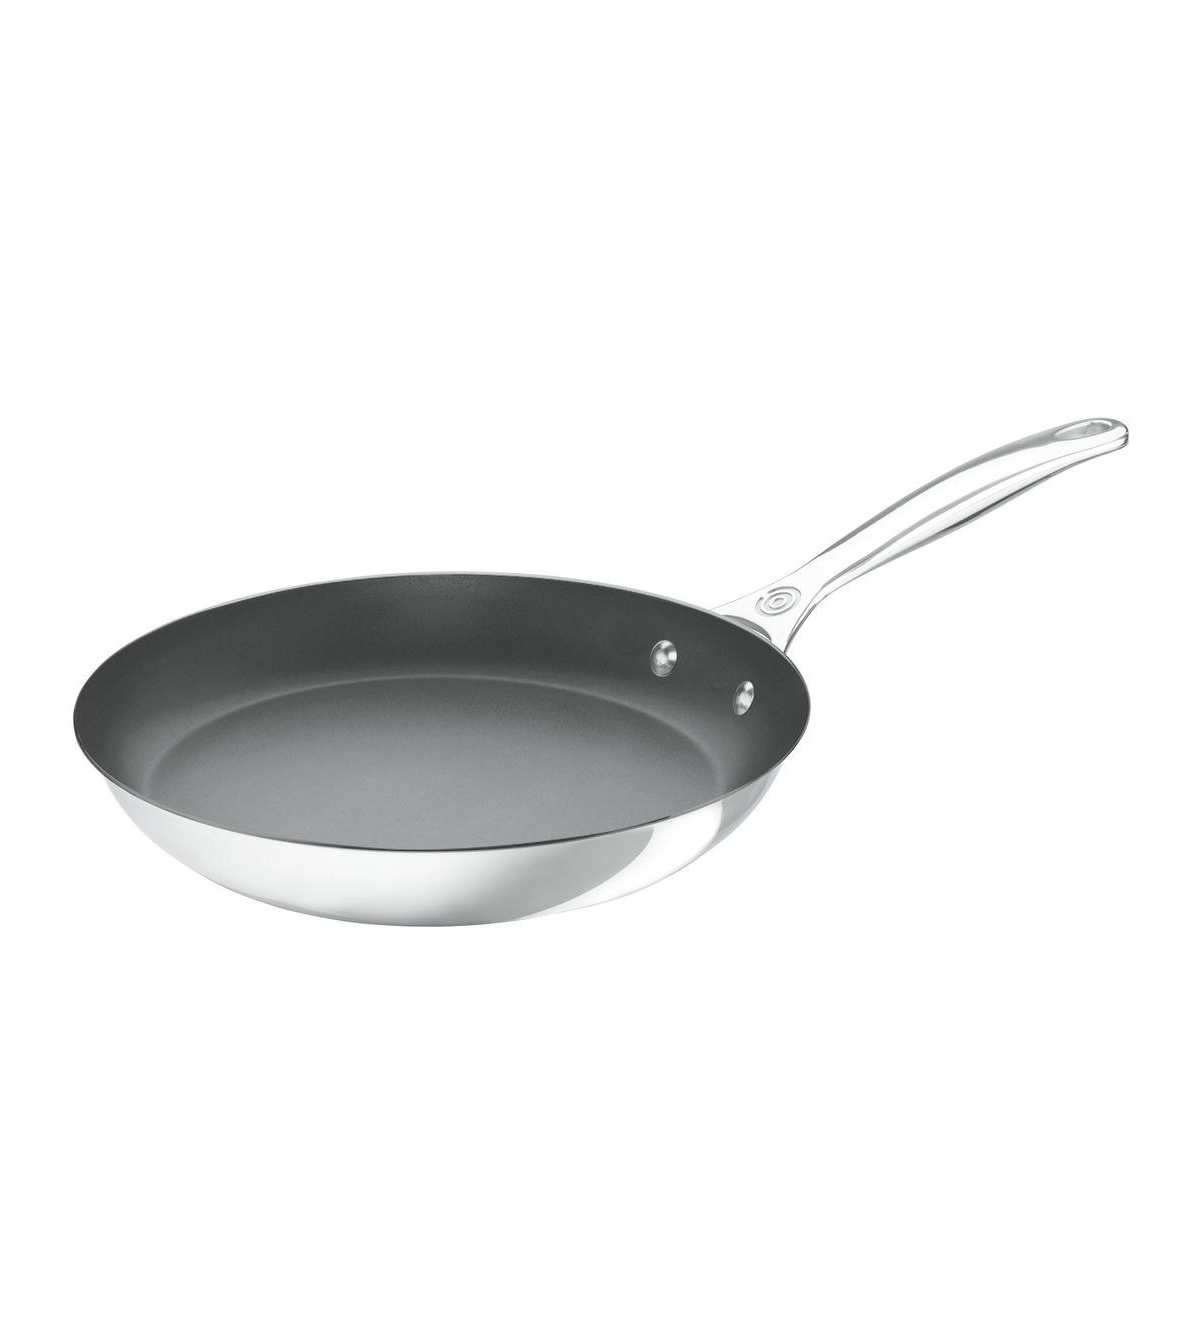 Le Creuset 8" 3-ply Stainless Steel Nonstick Frying Pan In N,a